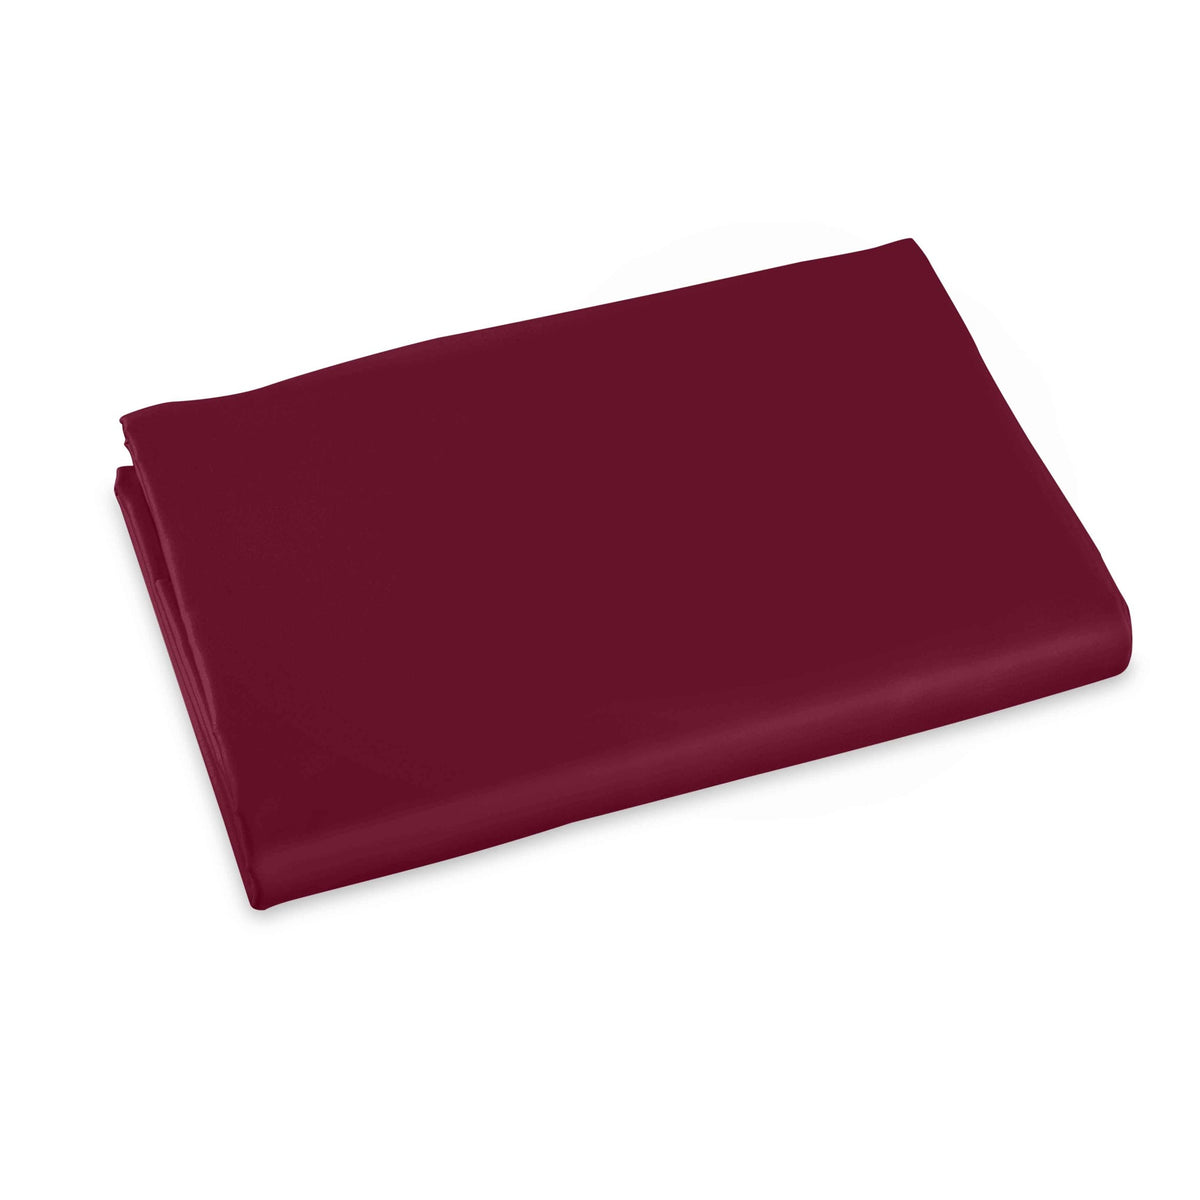 Clear Image of Signoria Raffaello Fitted Sheet in Cardinale Red Color